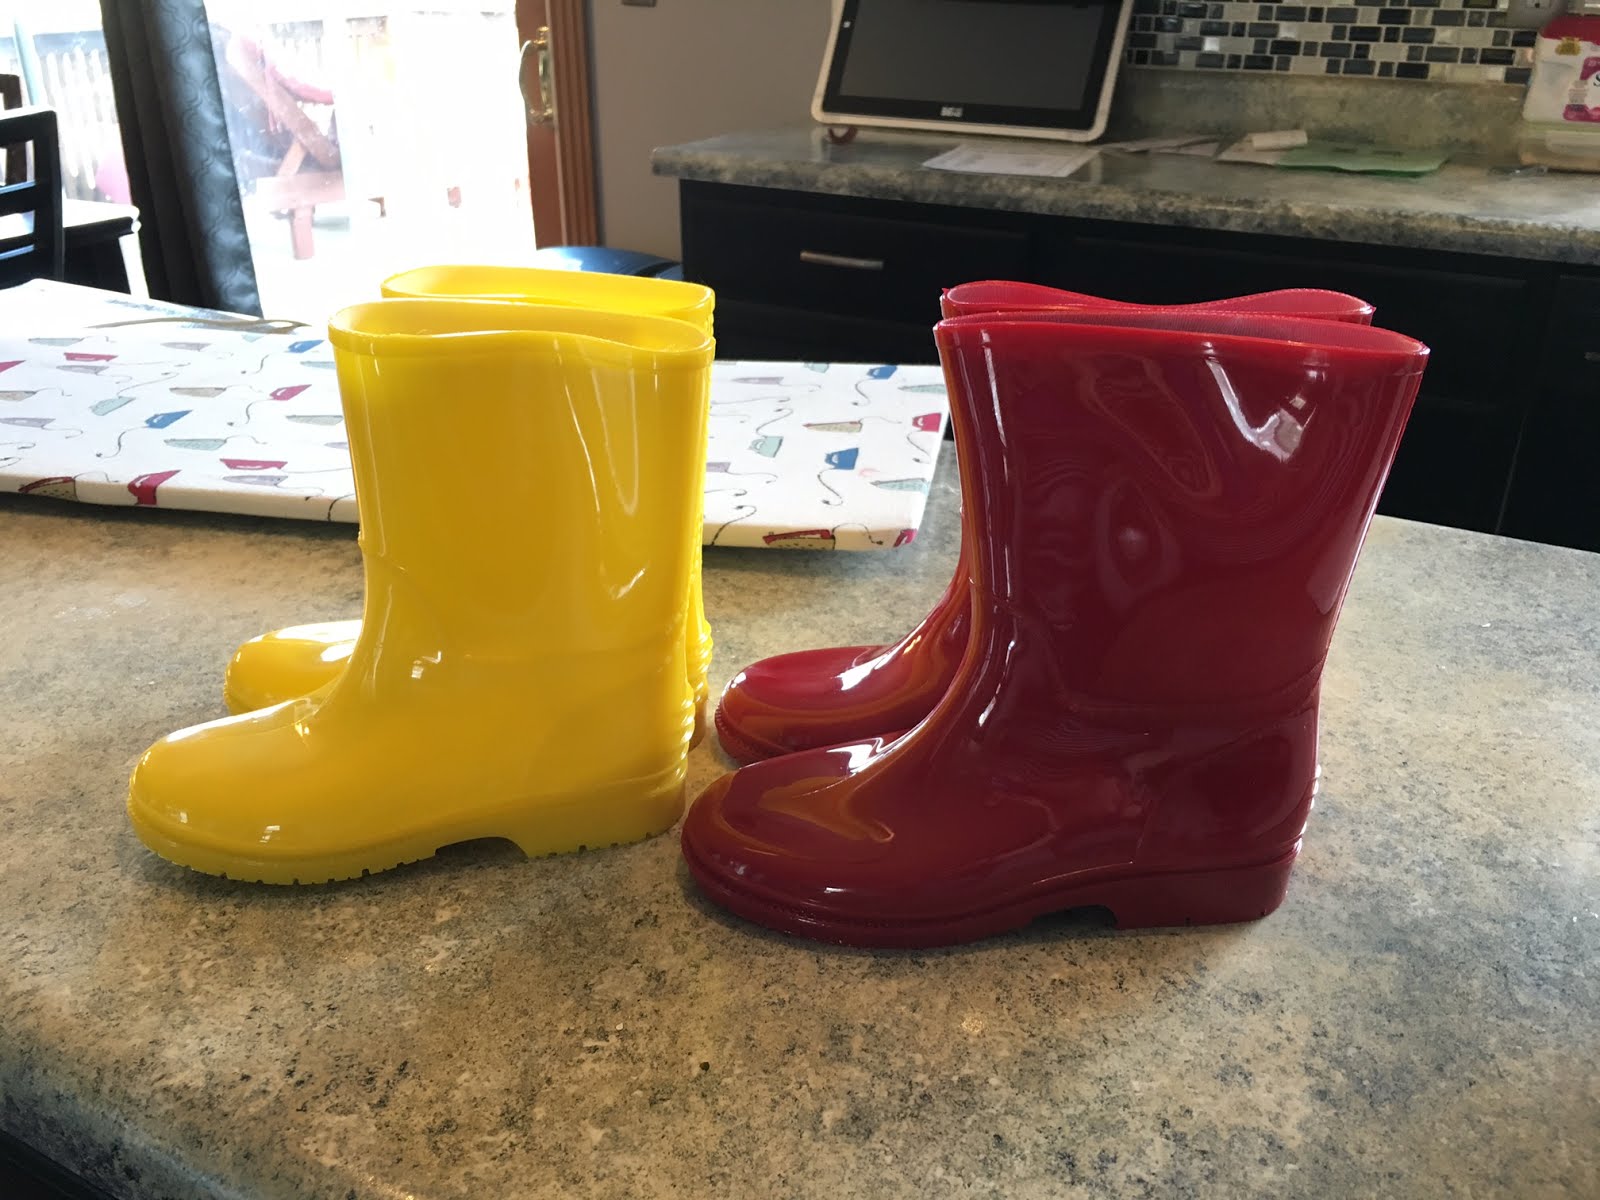 Life as a Spencer...: Superhero boots are here!